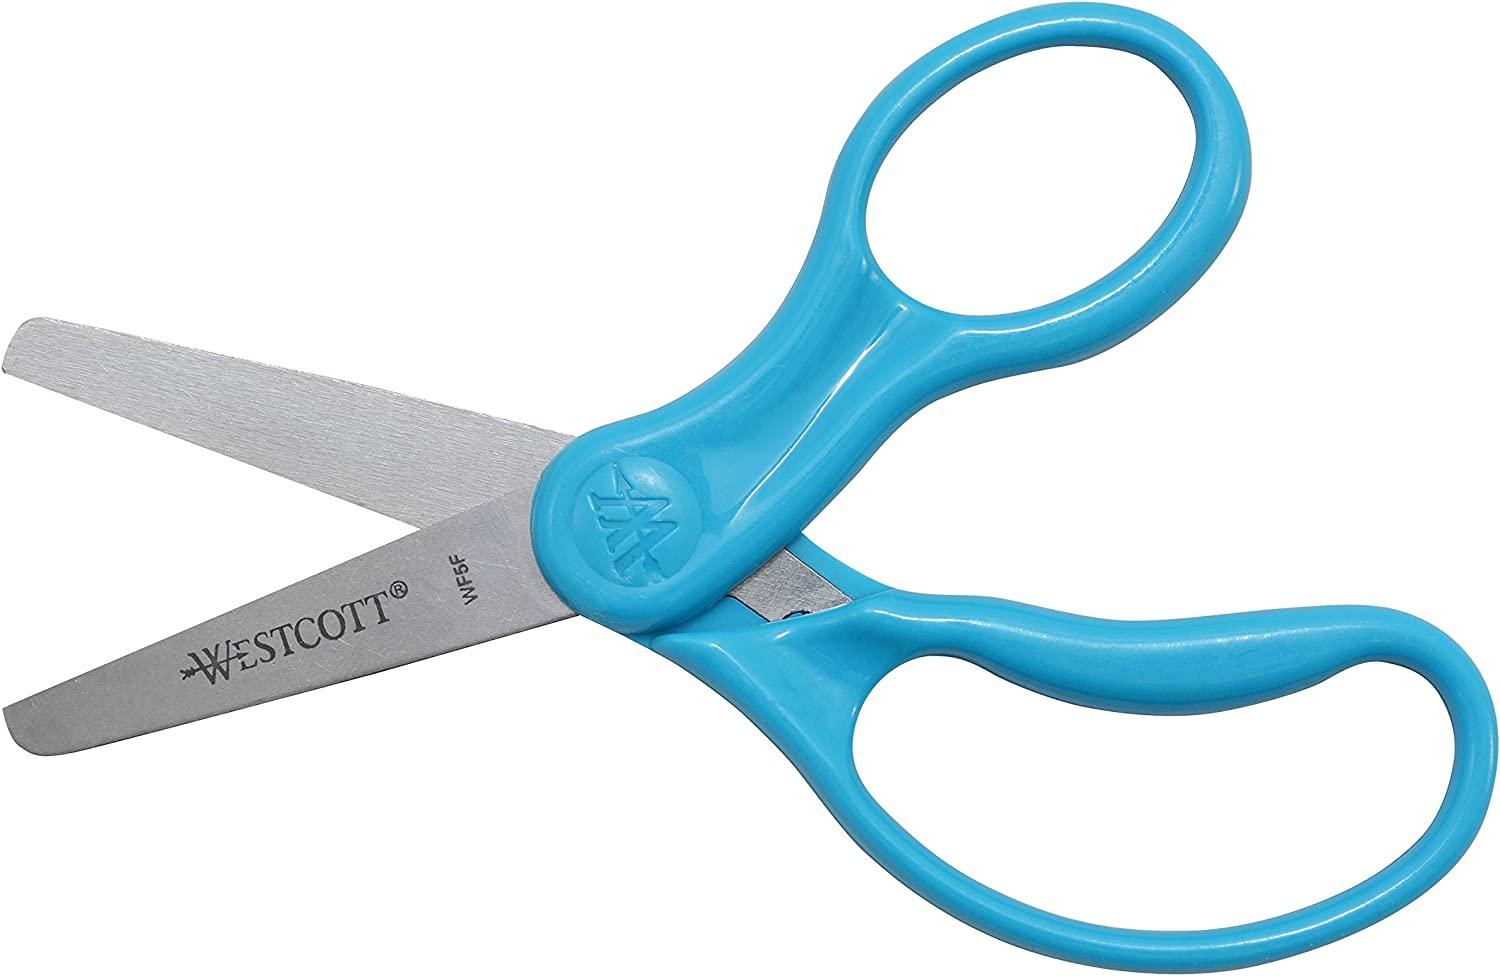 Lefty's Blunt Tip True Left Handed Scissors for Kids, Two Pack (Blue Two-Tone)